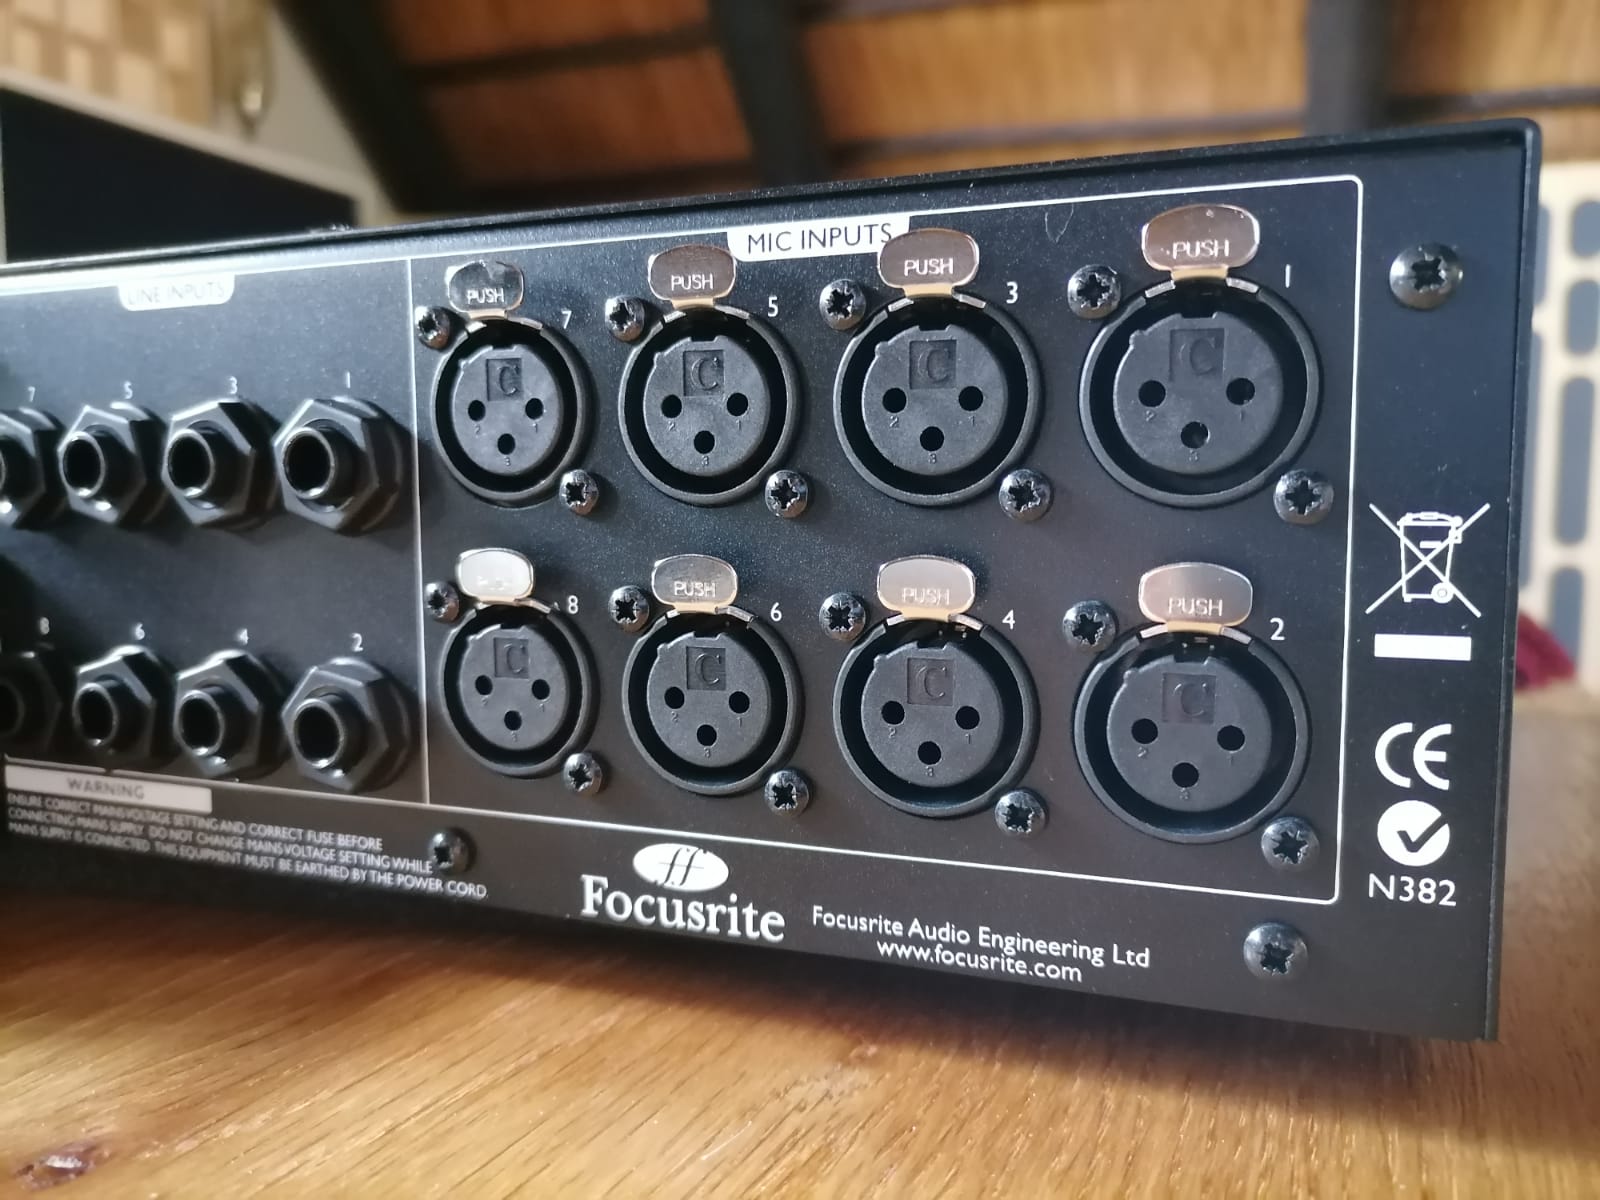 Focusrite ISA828 8-channel Mic & Line Preamp - Preowned